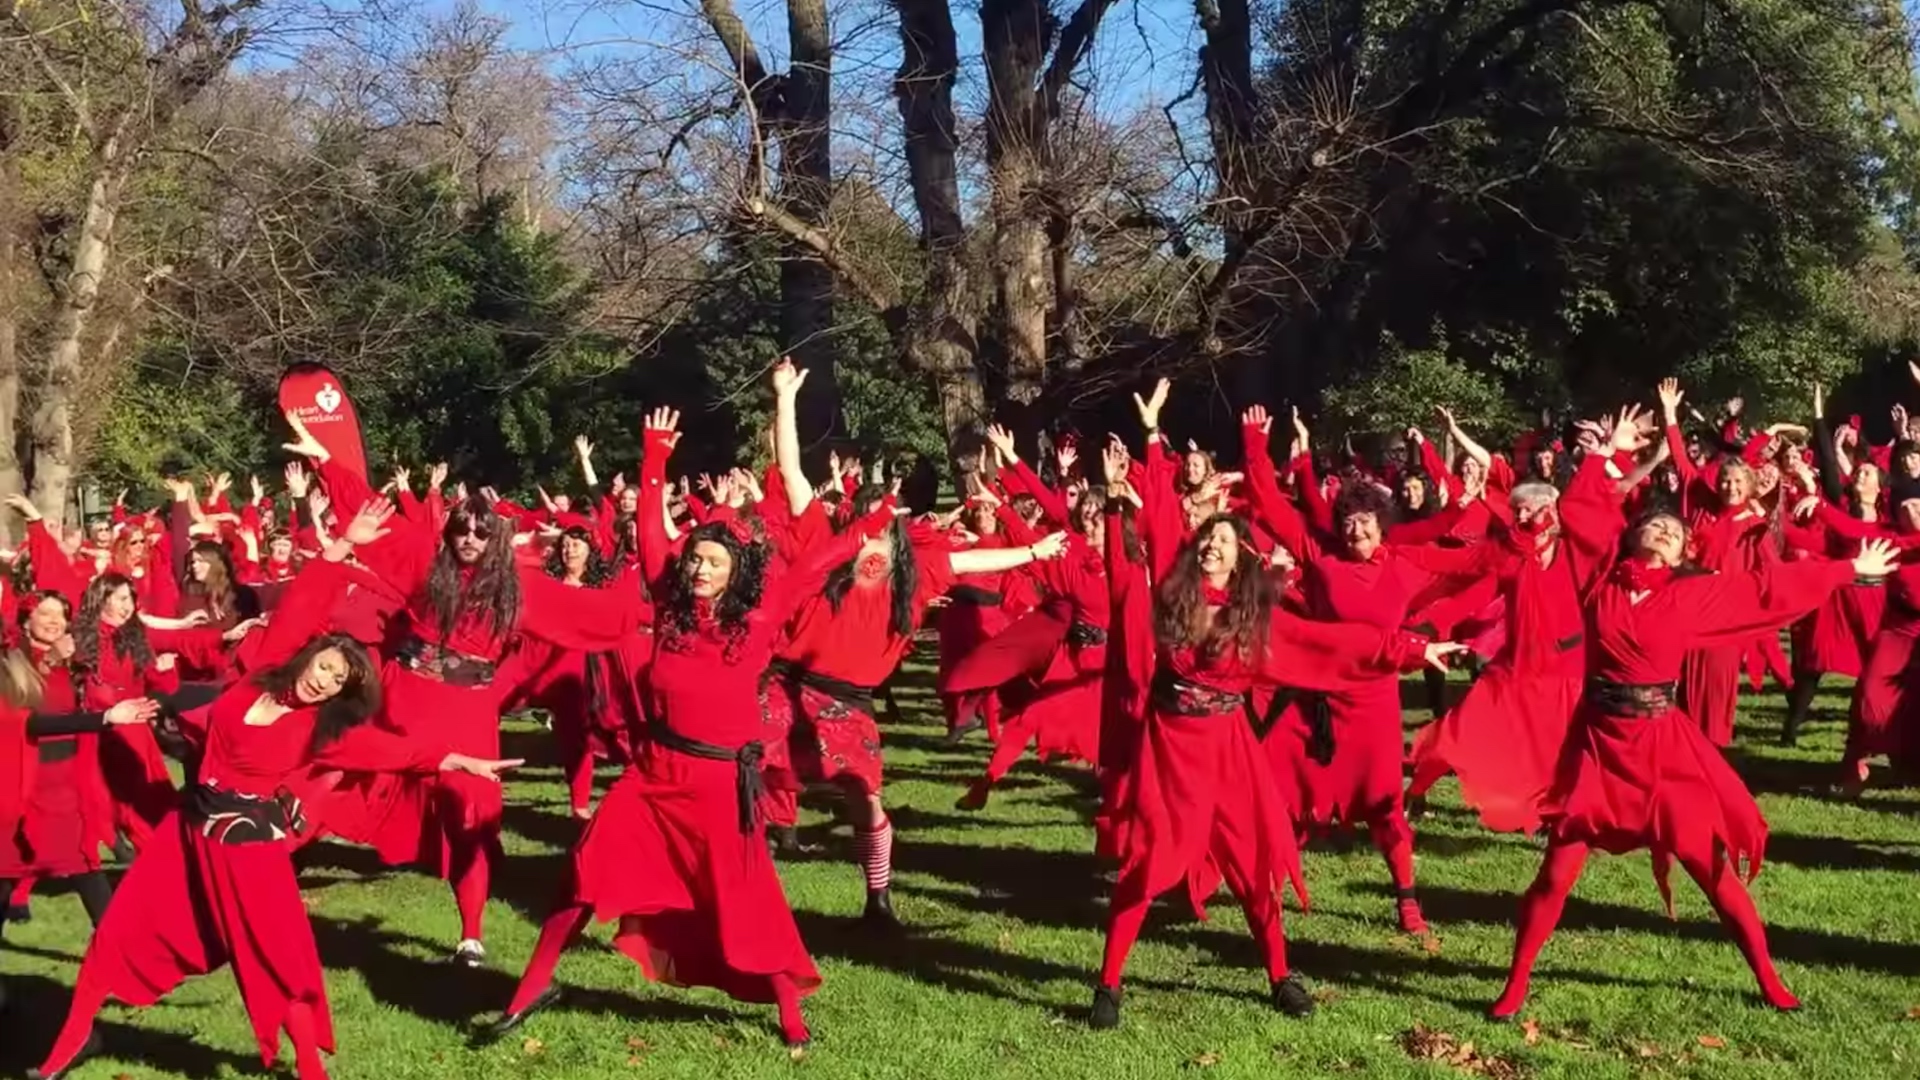 Watch Of Aussies Kate Bush's For 'The Most Wuthering Heights Day Ever' - Music Feeds